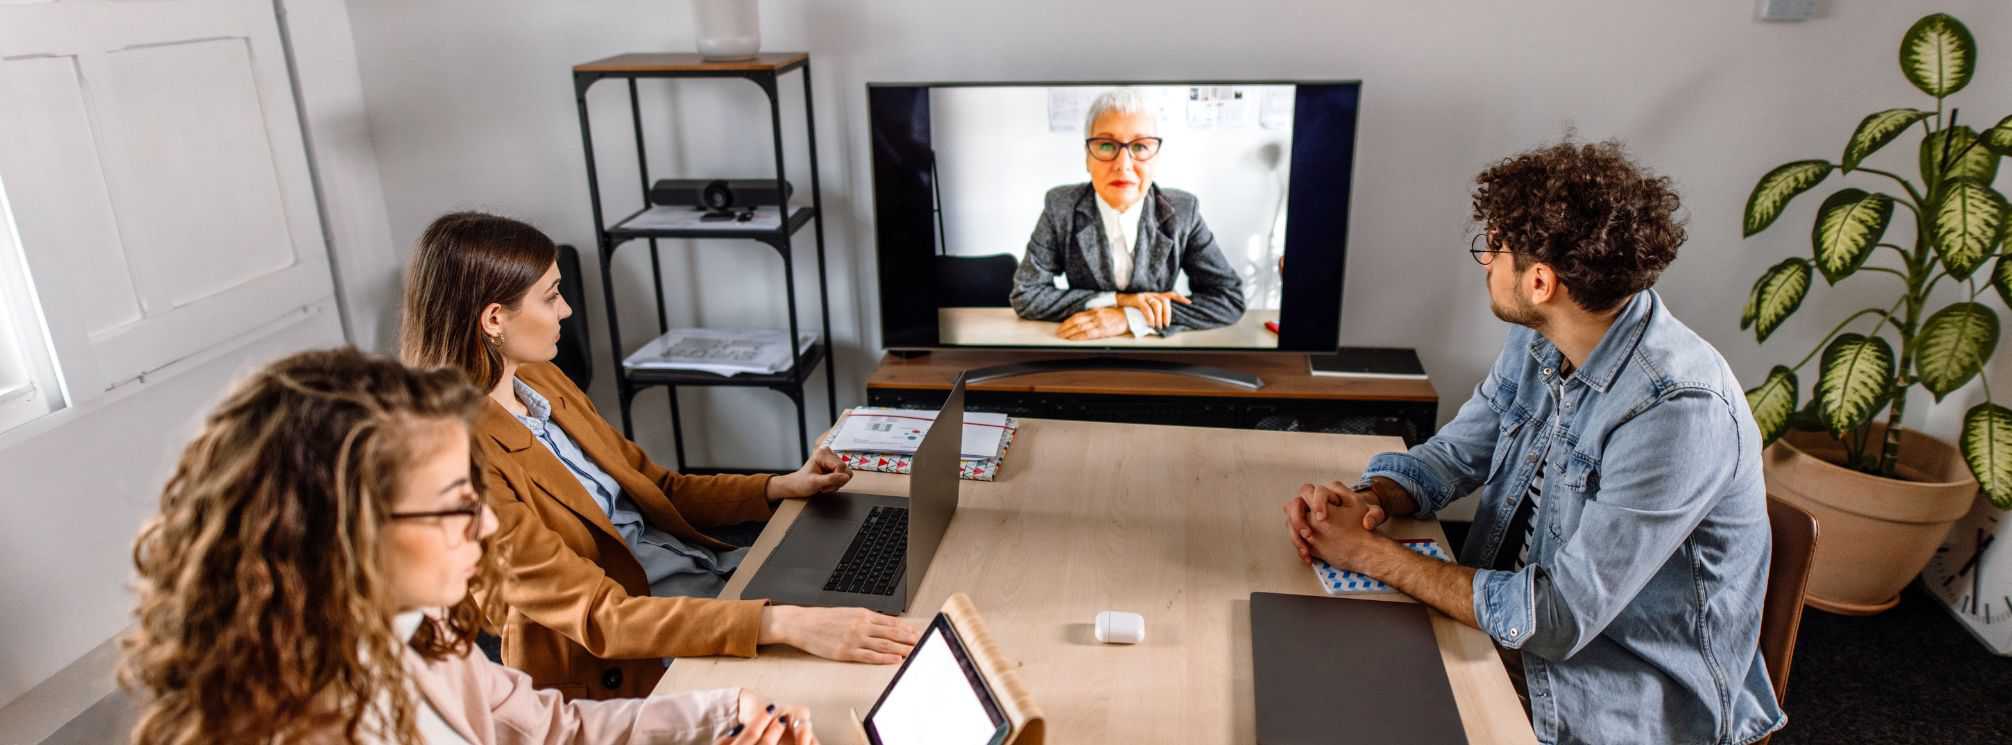 photo example of a hybrid workforce where one remote employee is dialed into a meeting on a tv screen and the other three employees are in the office